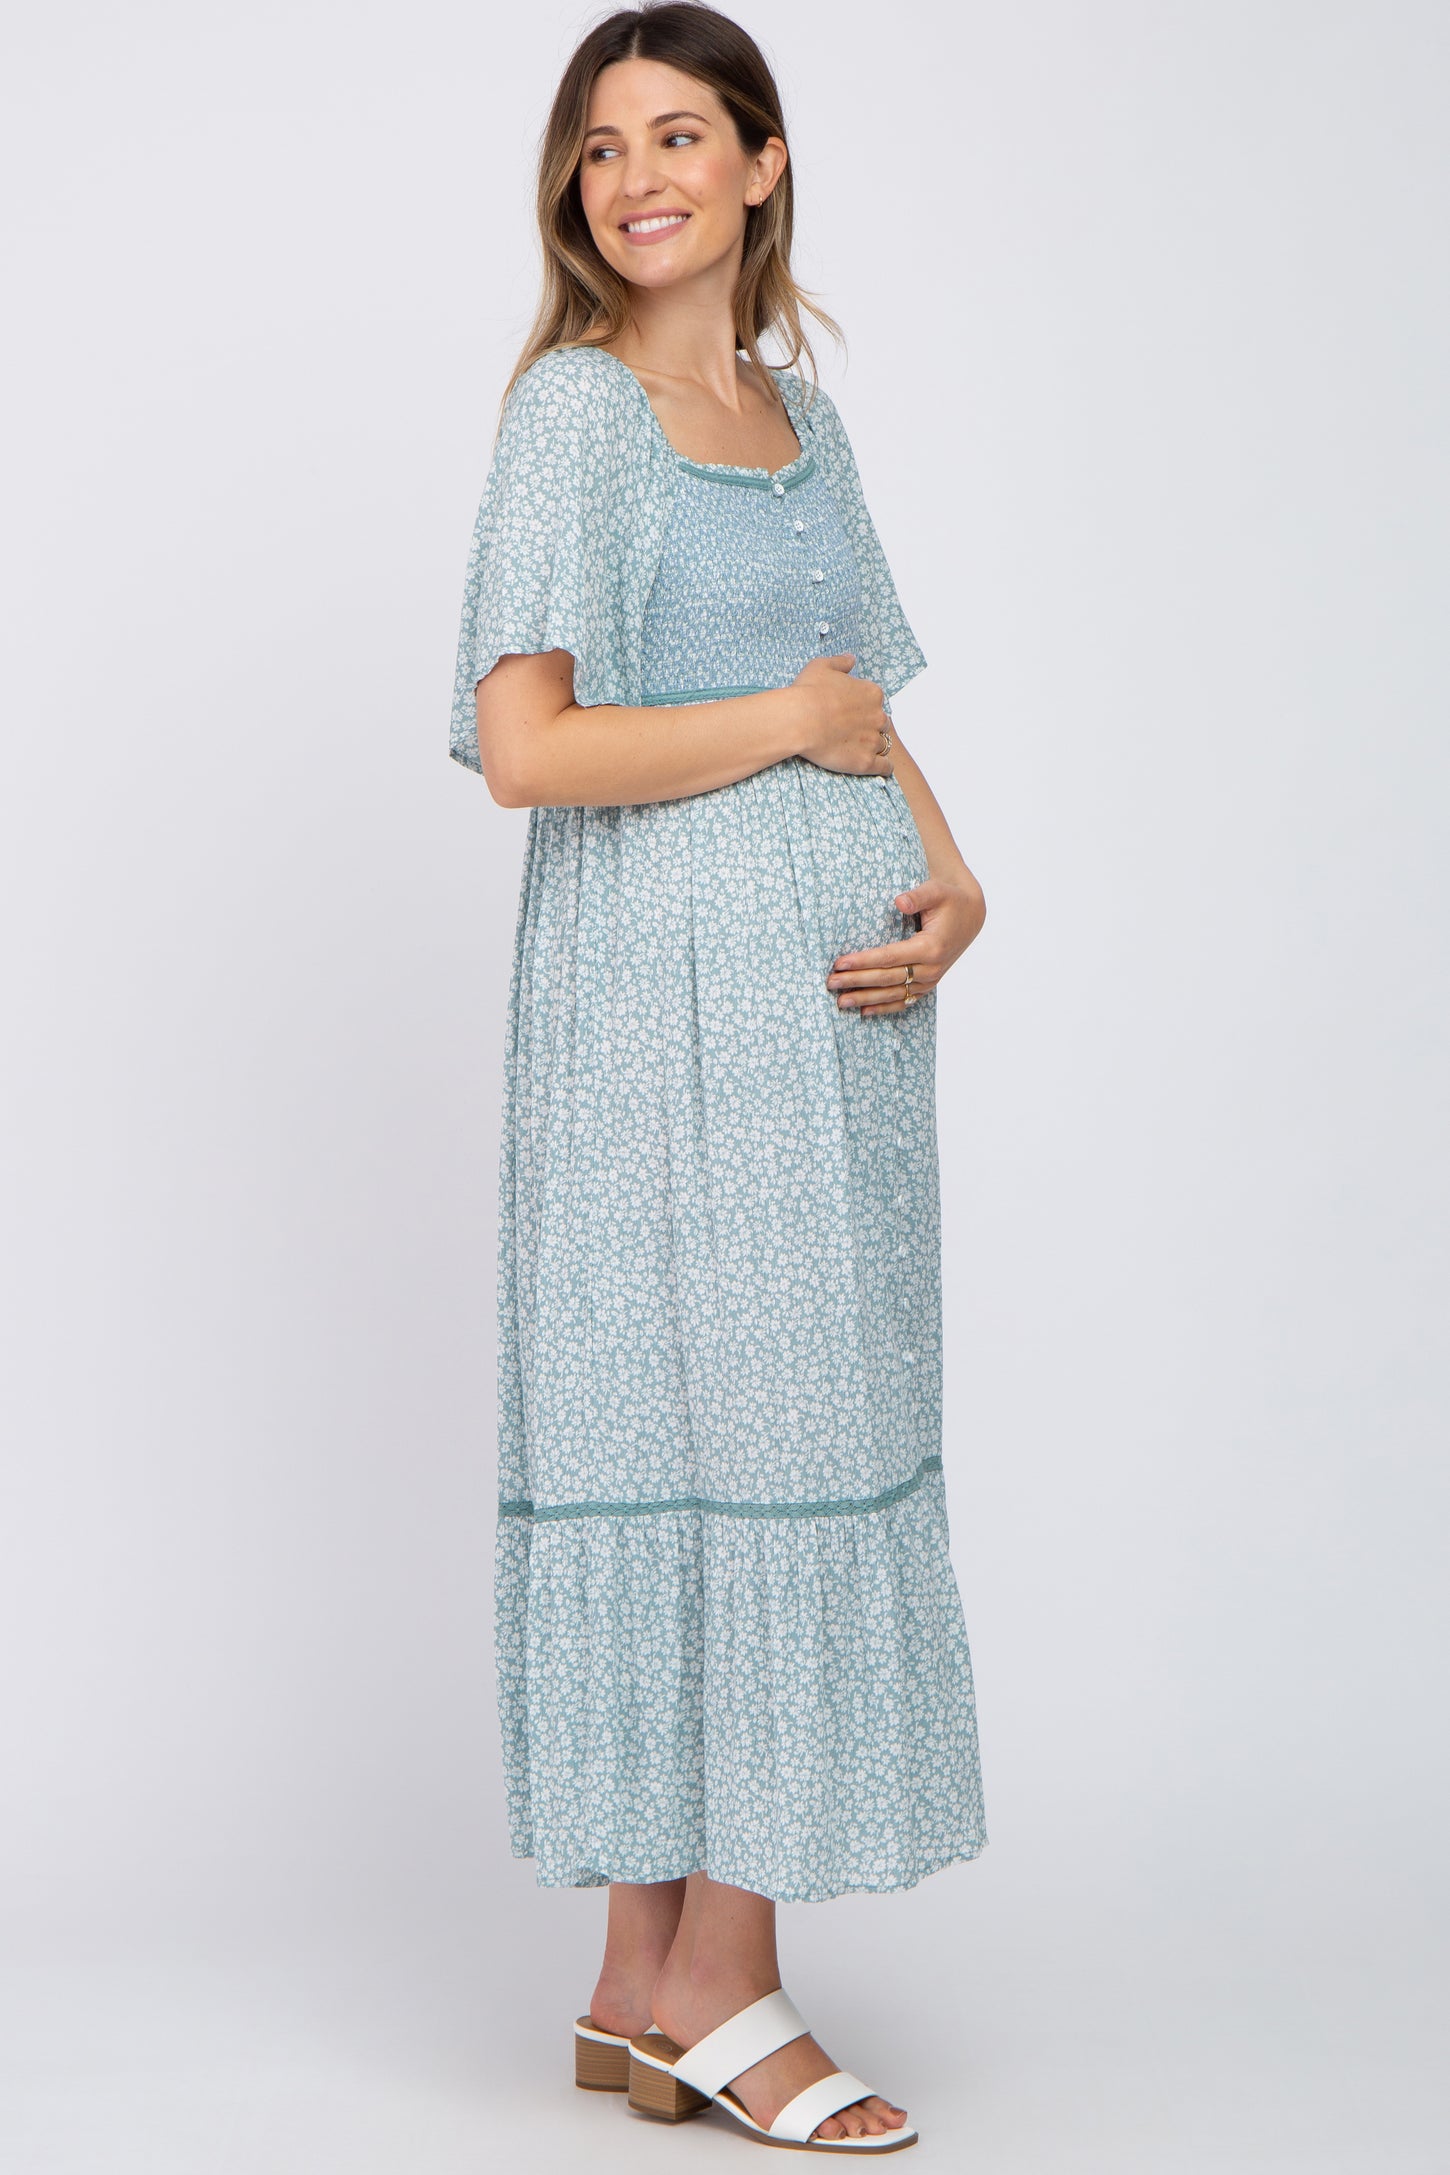 Light Blue Floral Square Neck Smocked Button Front Maternity Midi Dres ...